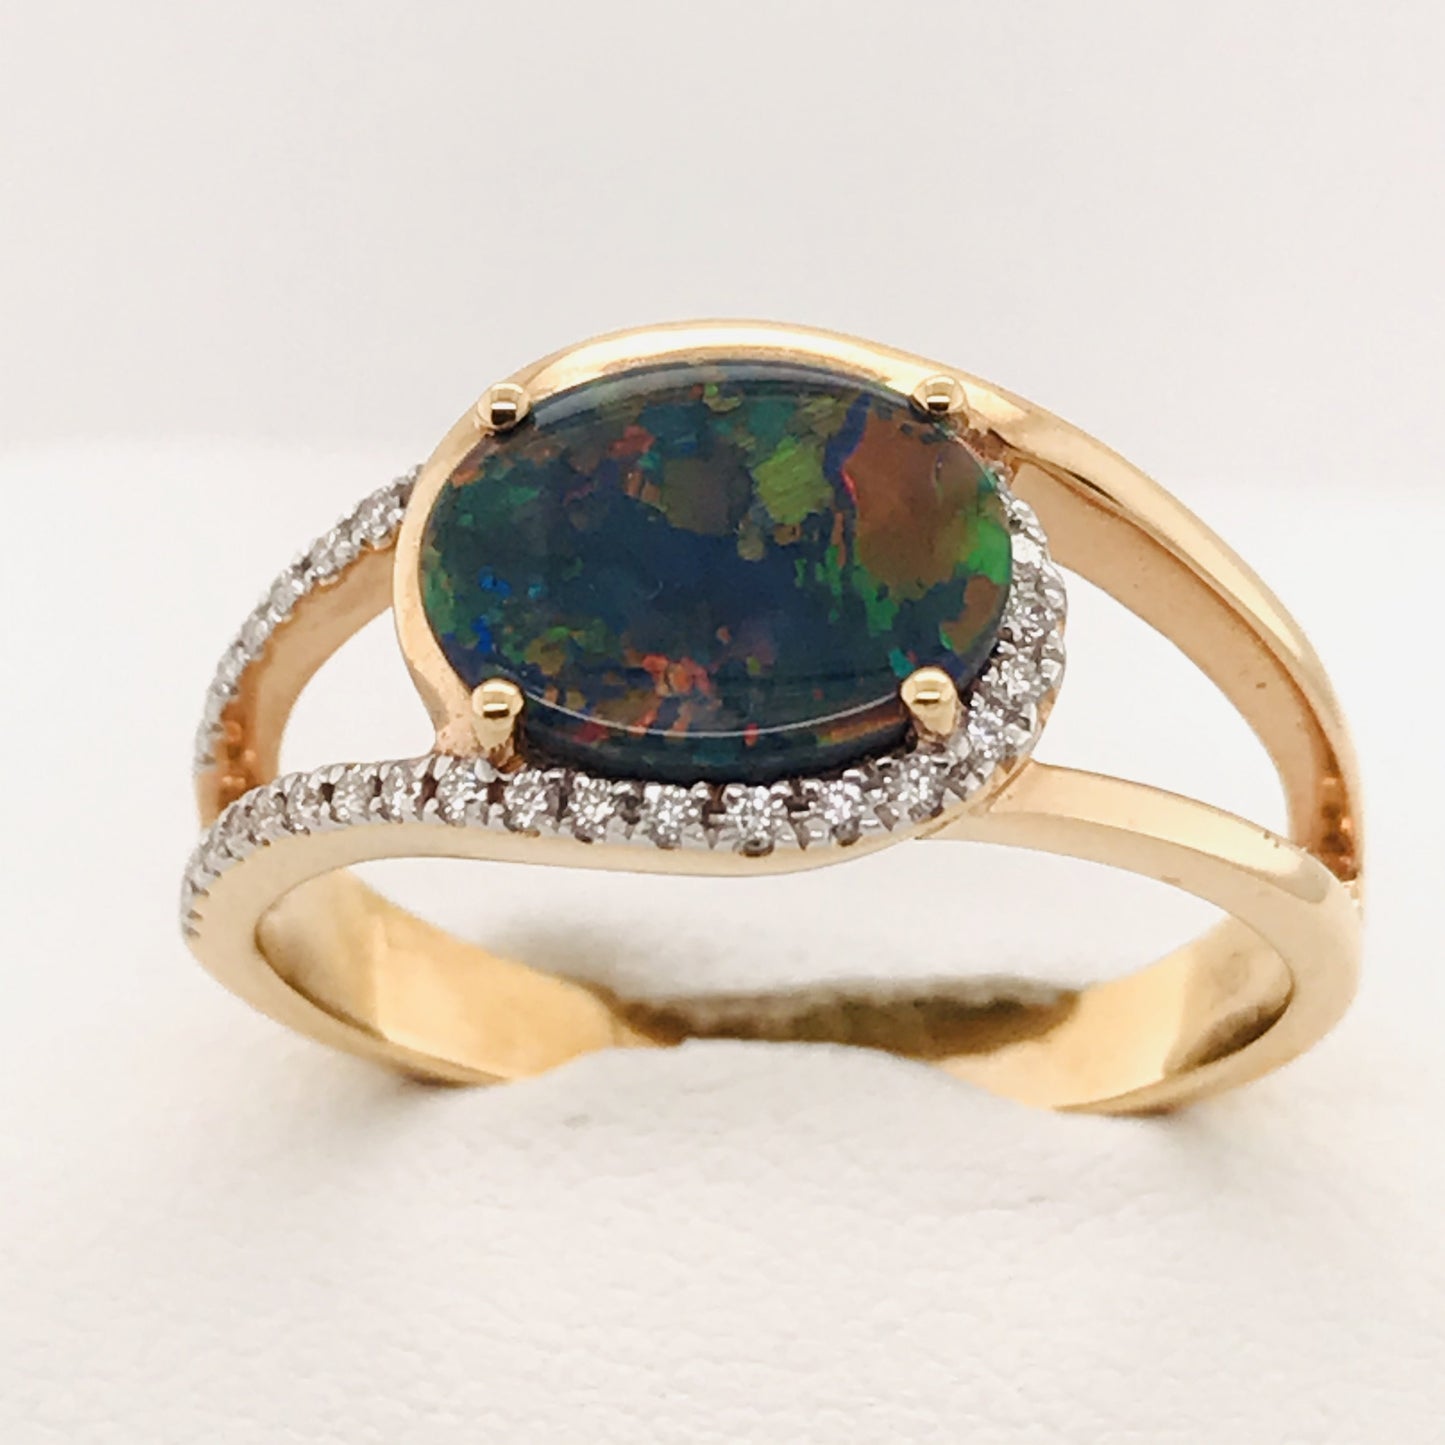 18K RG SOLID BLACK OPAL AND DIAMOND RING